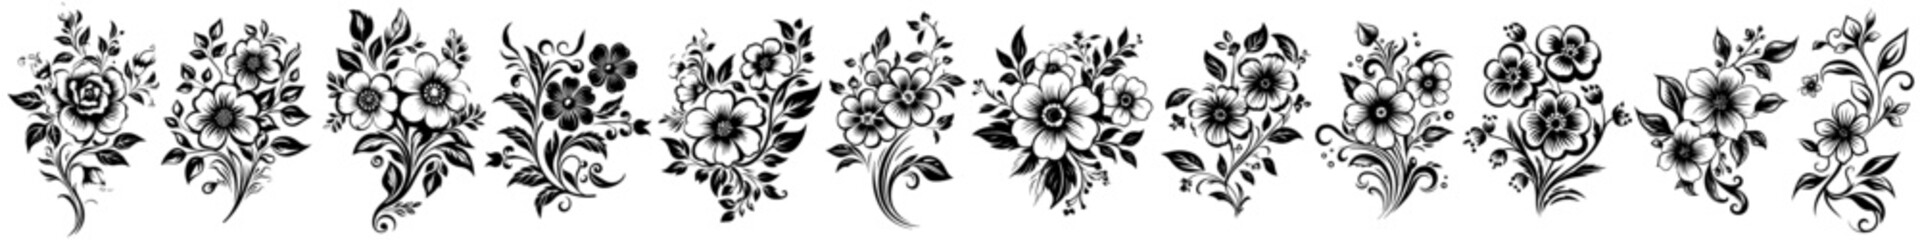 decorative flowers blooming plants black vector collection set